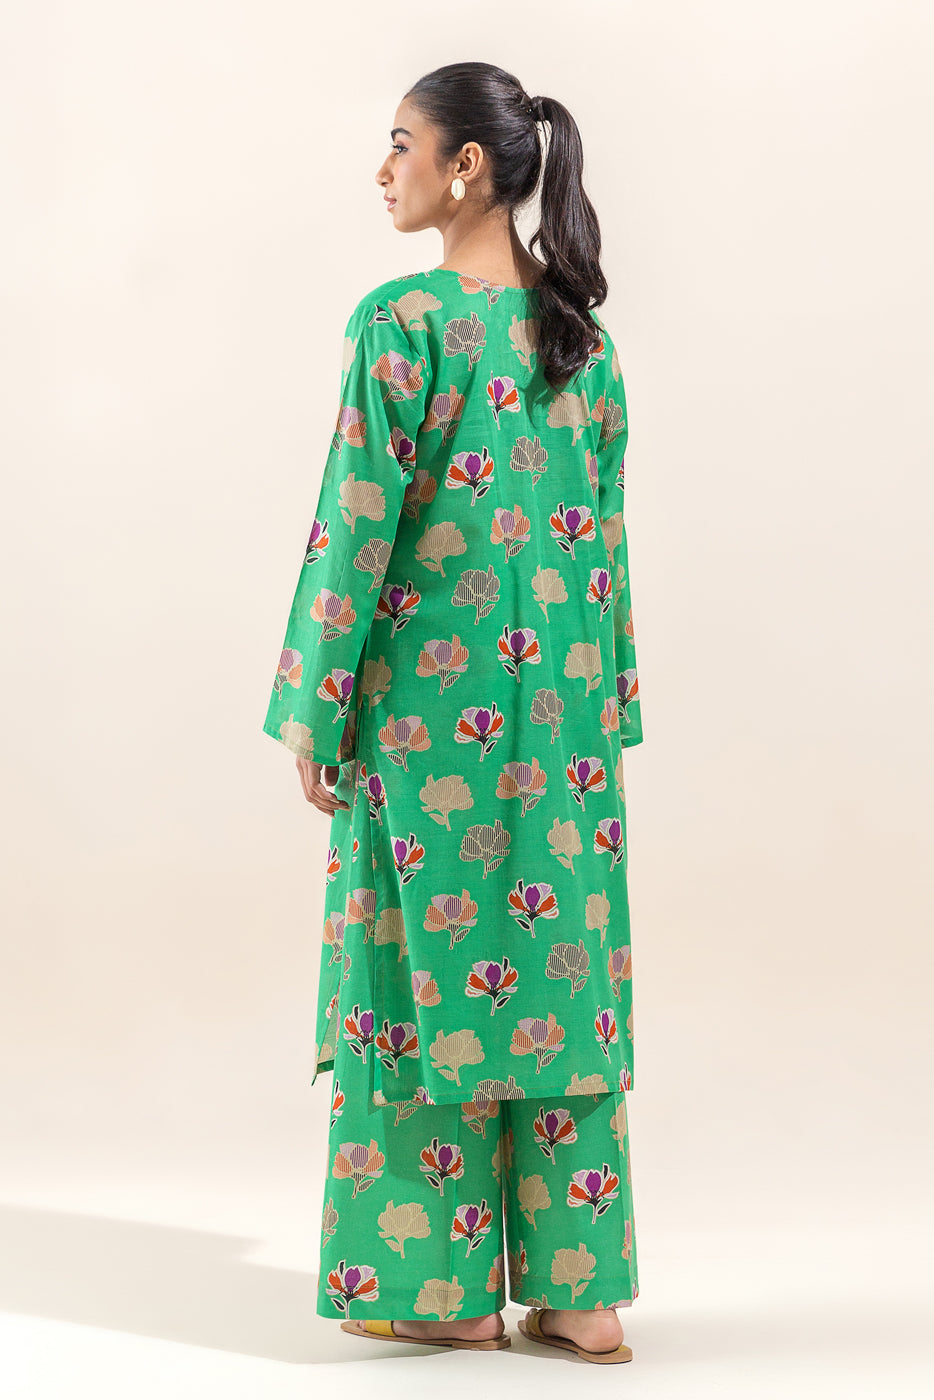 2 PIECE PRINTED LAWN SUIT-FOREST JADE (UNSTITCHED)